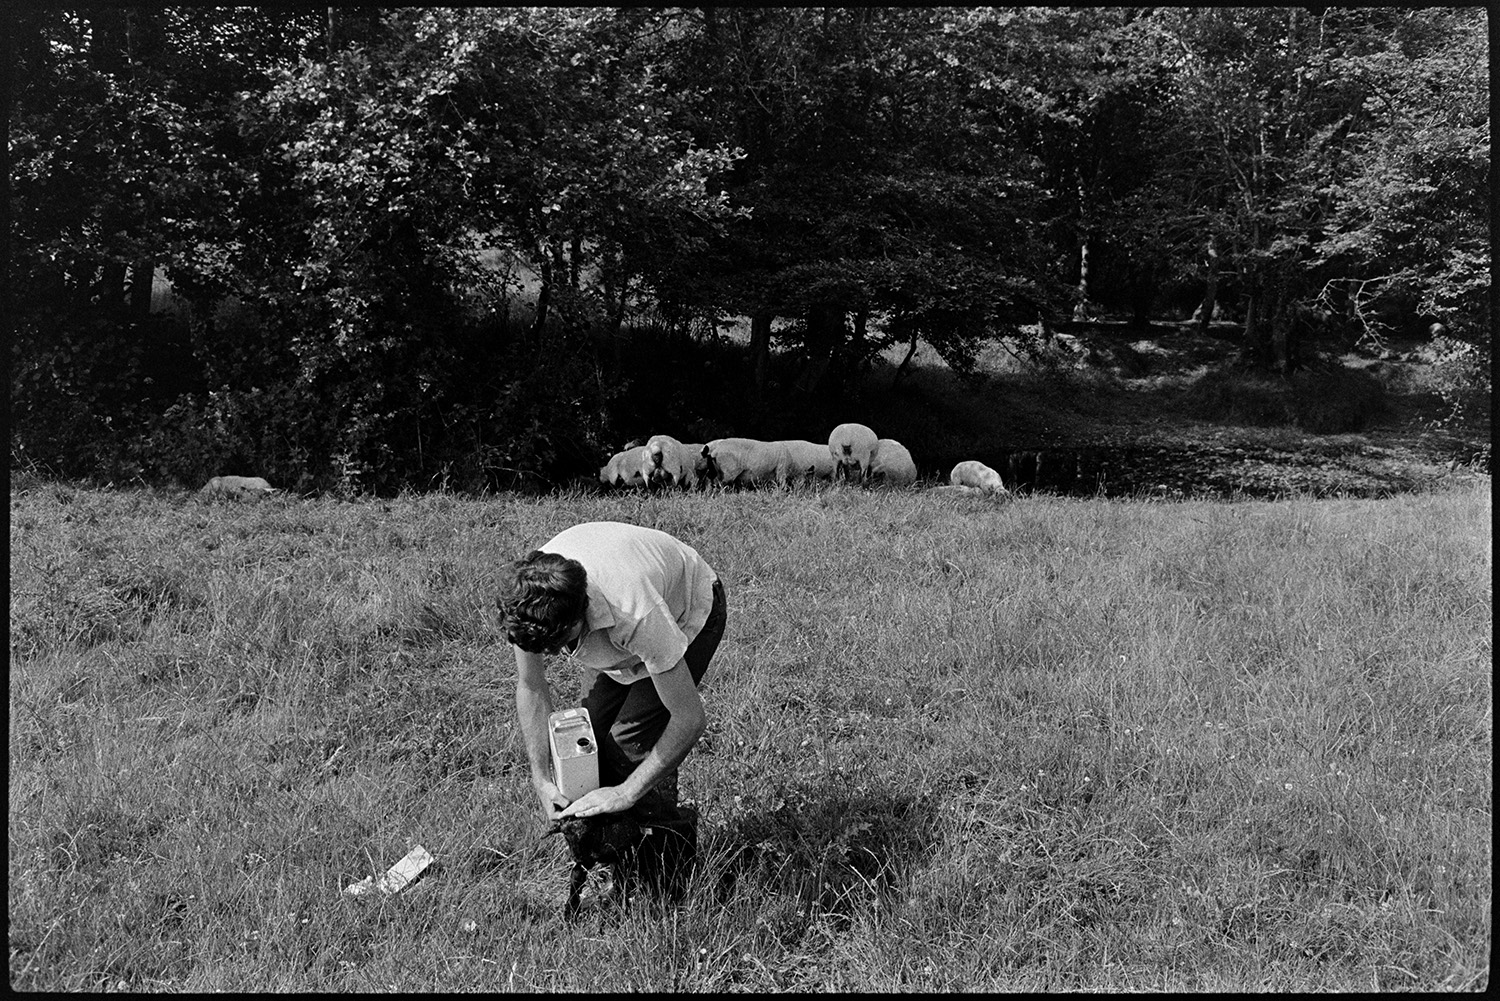 Farmers checking sheep and dosing.
[Graham Ward checking sheep and lambs in a field at Parsonage, Iddesleigh. He is medicating one of the lambs by pouring a liquid over it.]